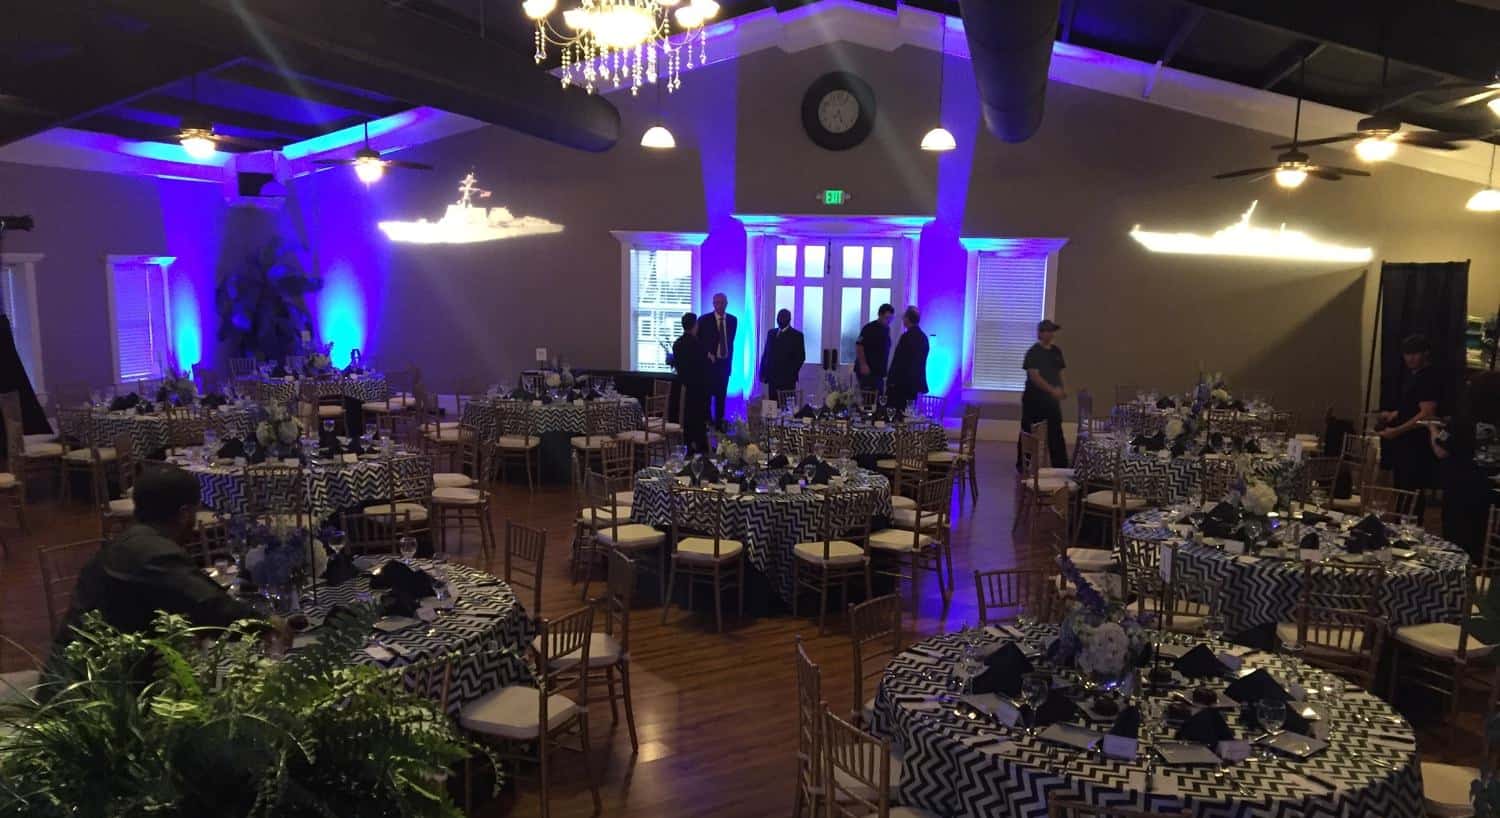 Ballroom decorated with round tables and chairs, black and white tablecloths, and blue lights